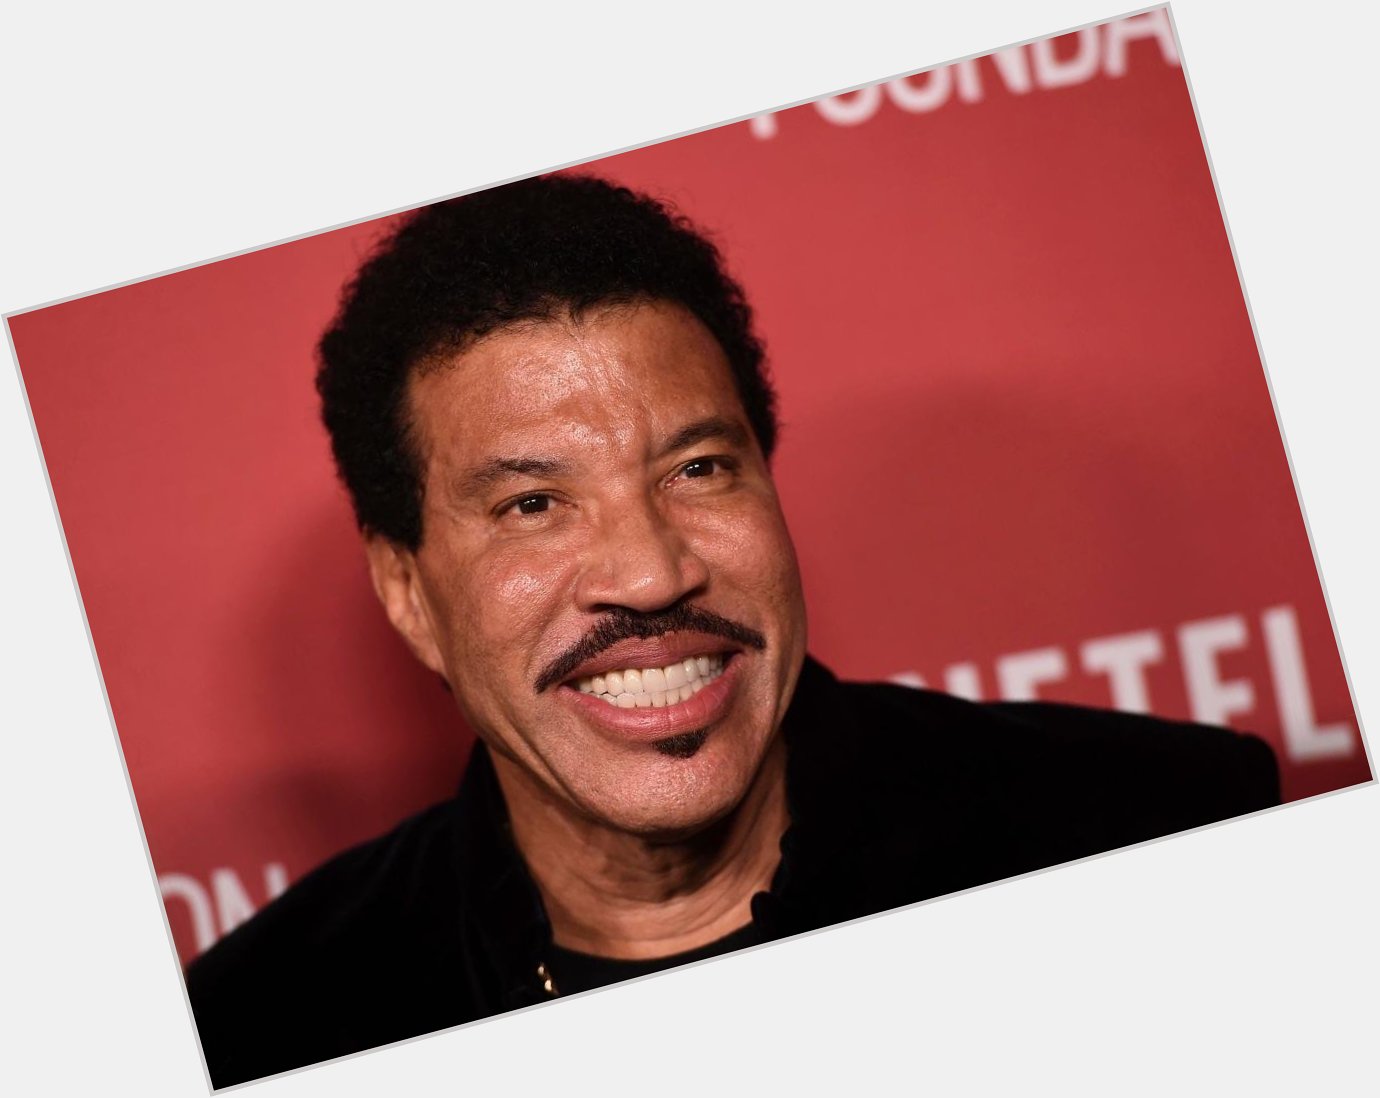 HAPPY BIRTHDAY Lionel Richie! Born on this date in 1949. 